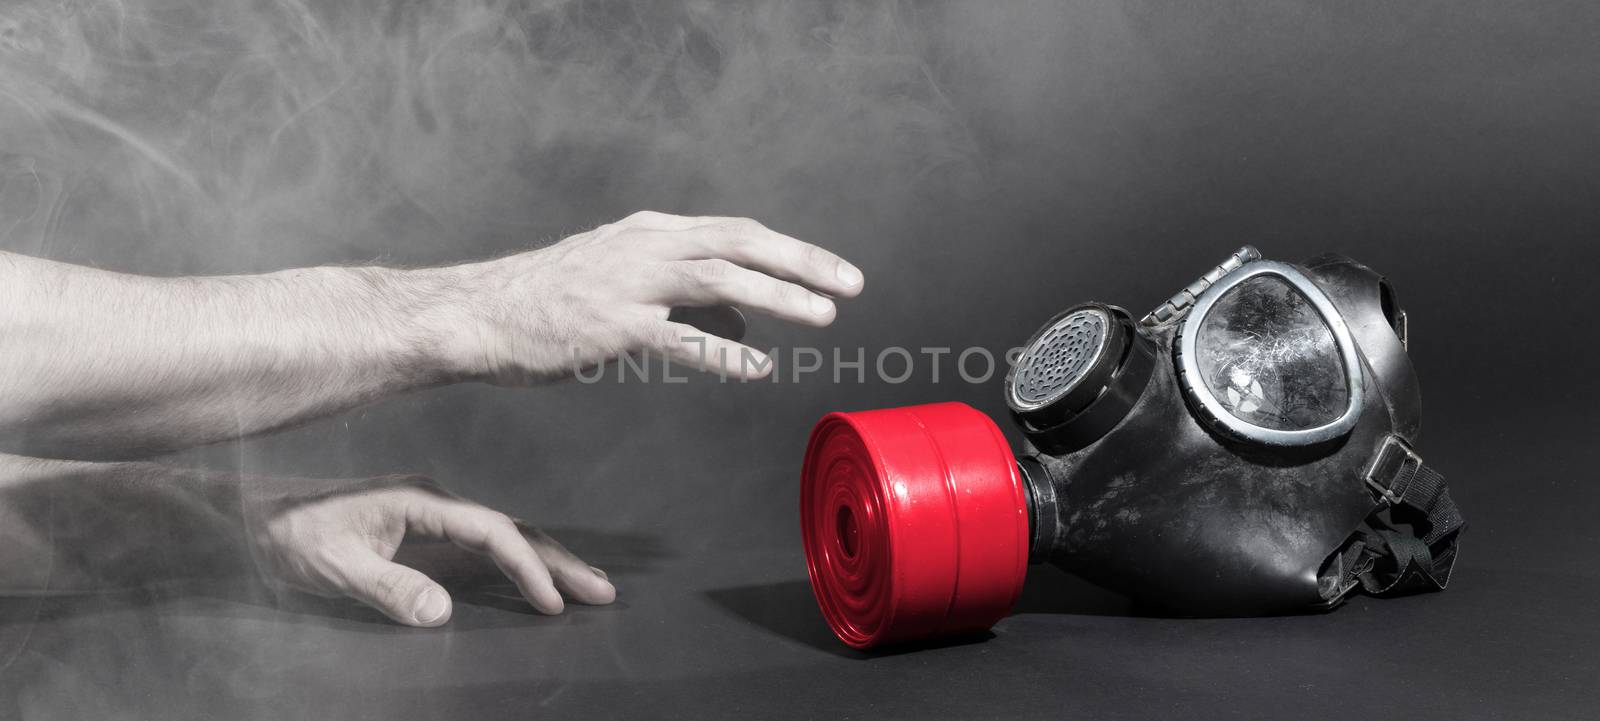 Man in room filled with smoke, trying to reach for vintage gasmask - Isolated on black - Red filter